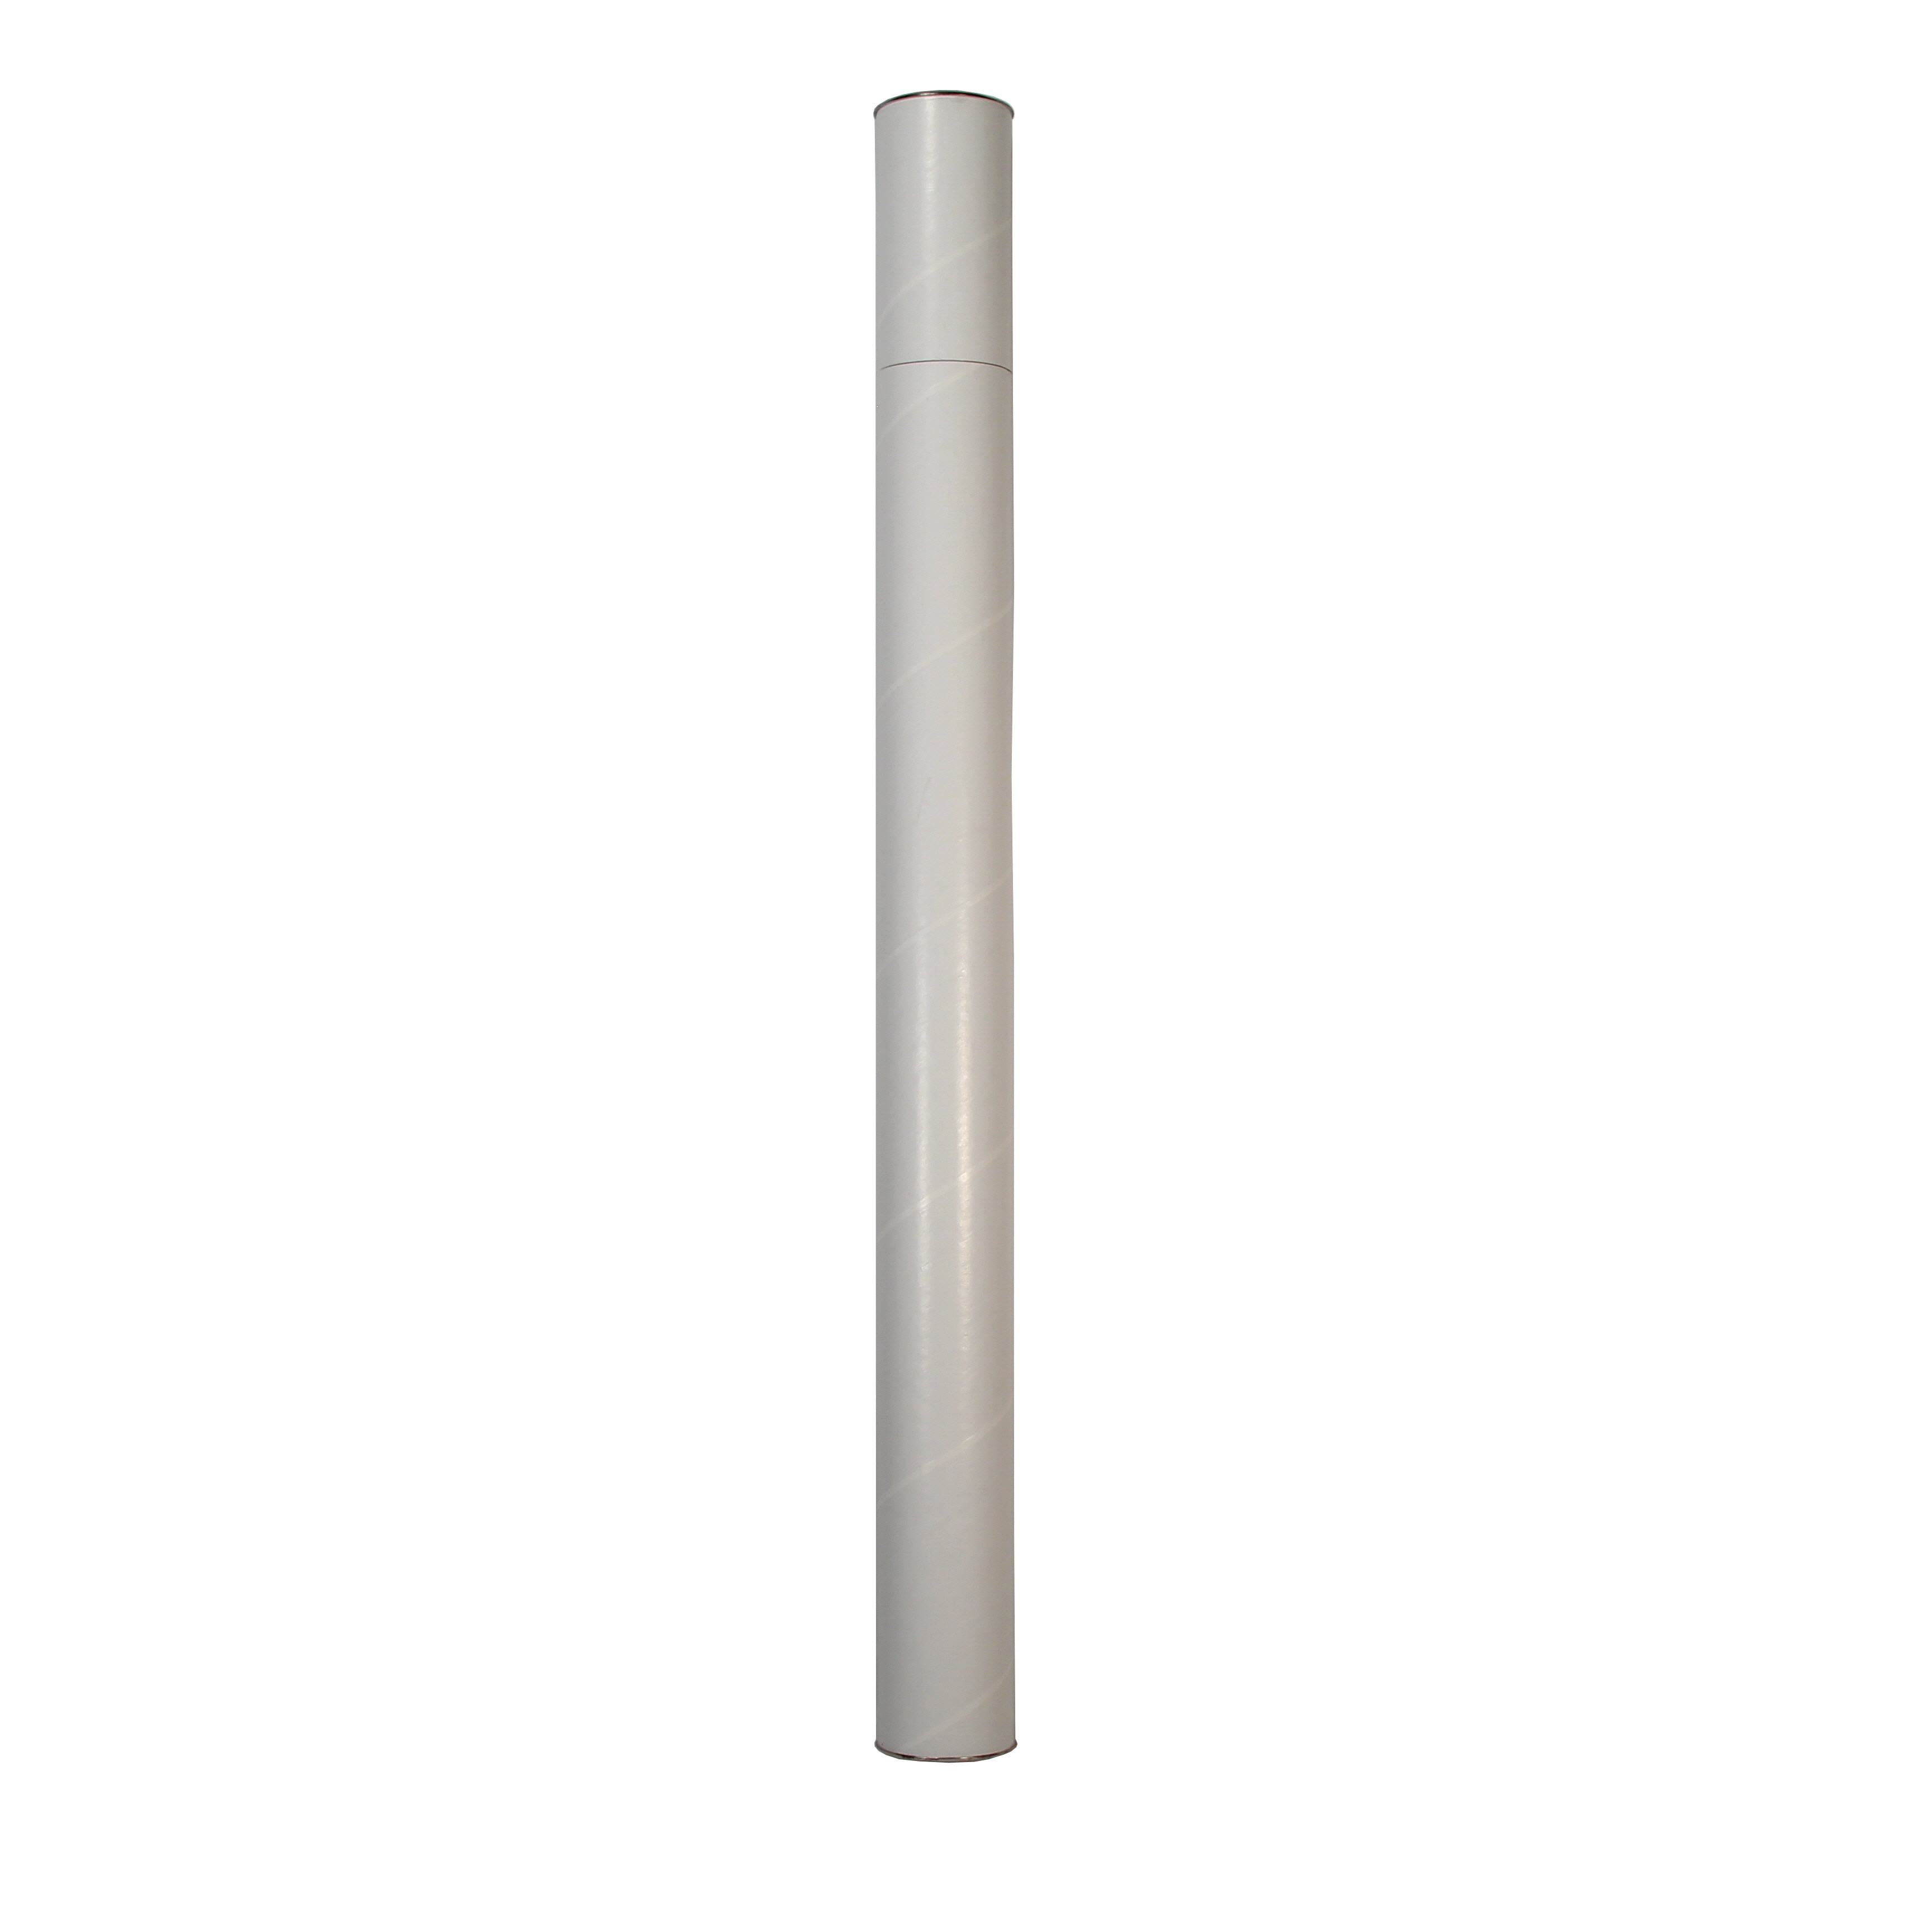 Tubeequeen Mailing Tubes with Caps, 3 inch x 24 inch Usable Length (24 Piece Pack)